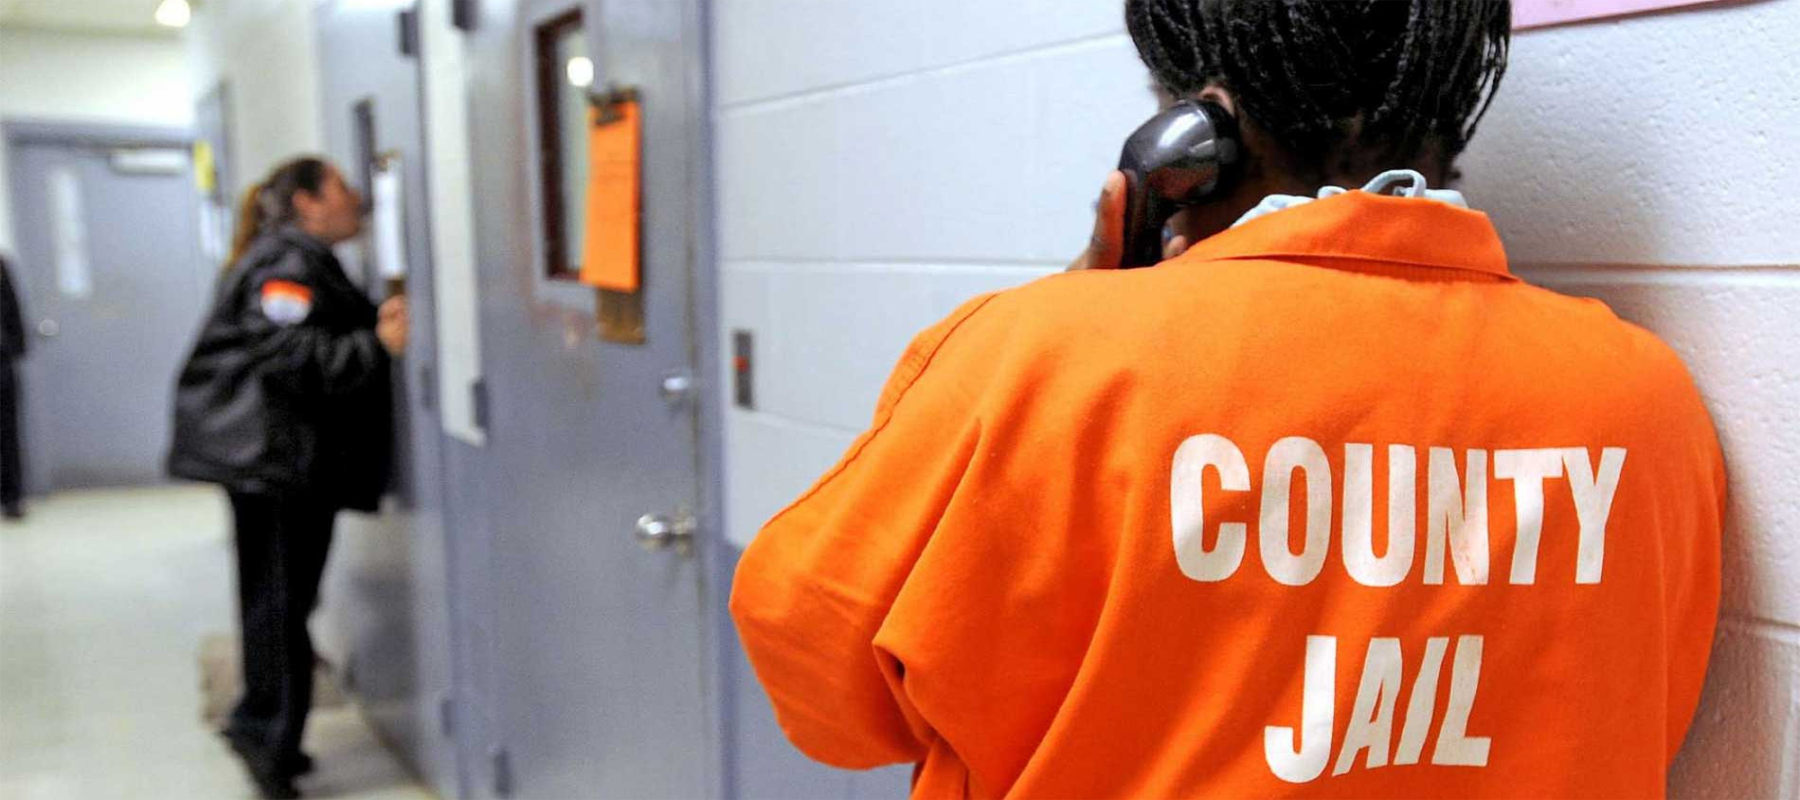 An Inmate in an Orange Suit Using a Prison Phone System